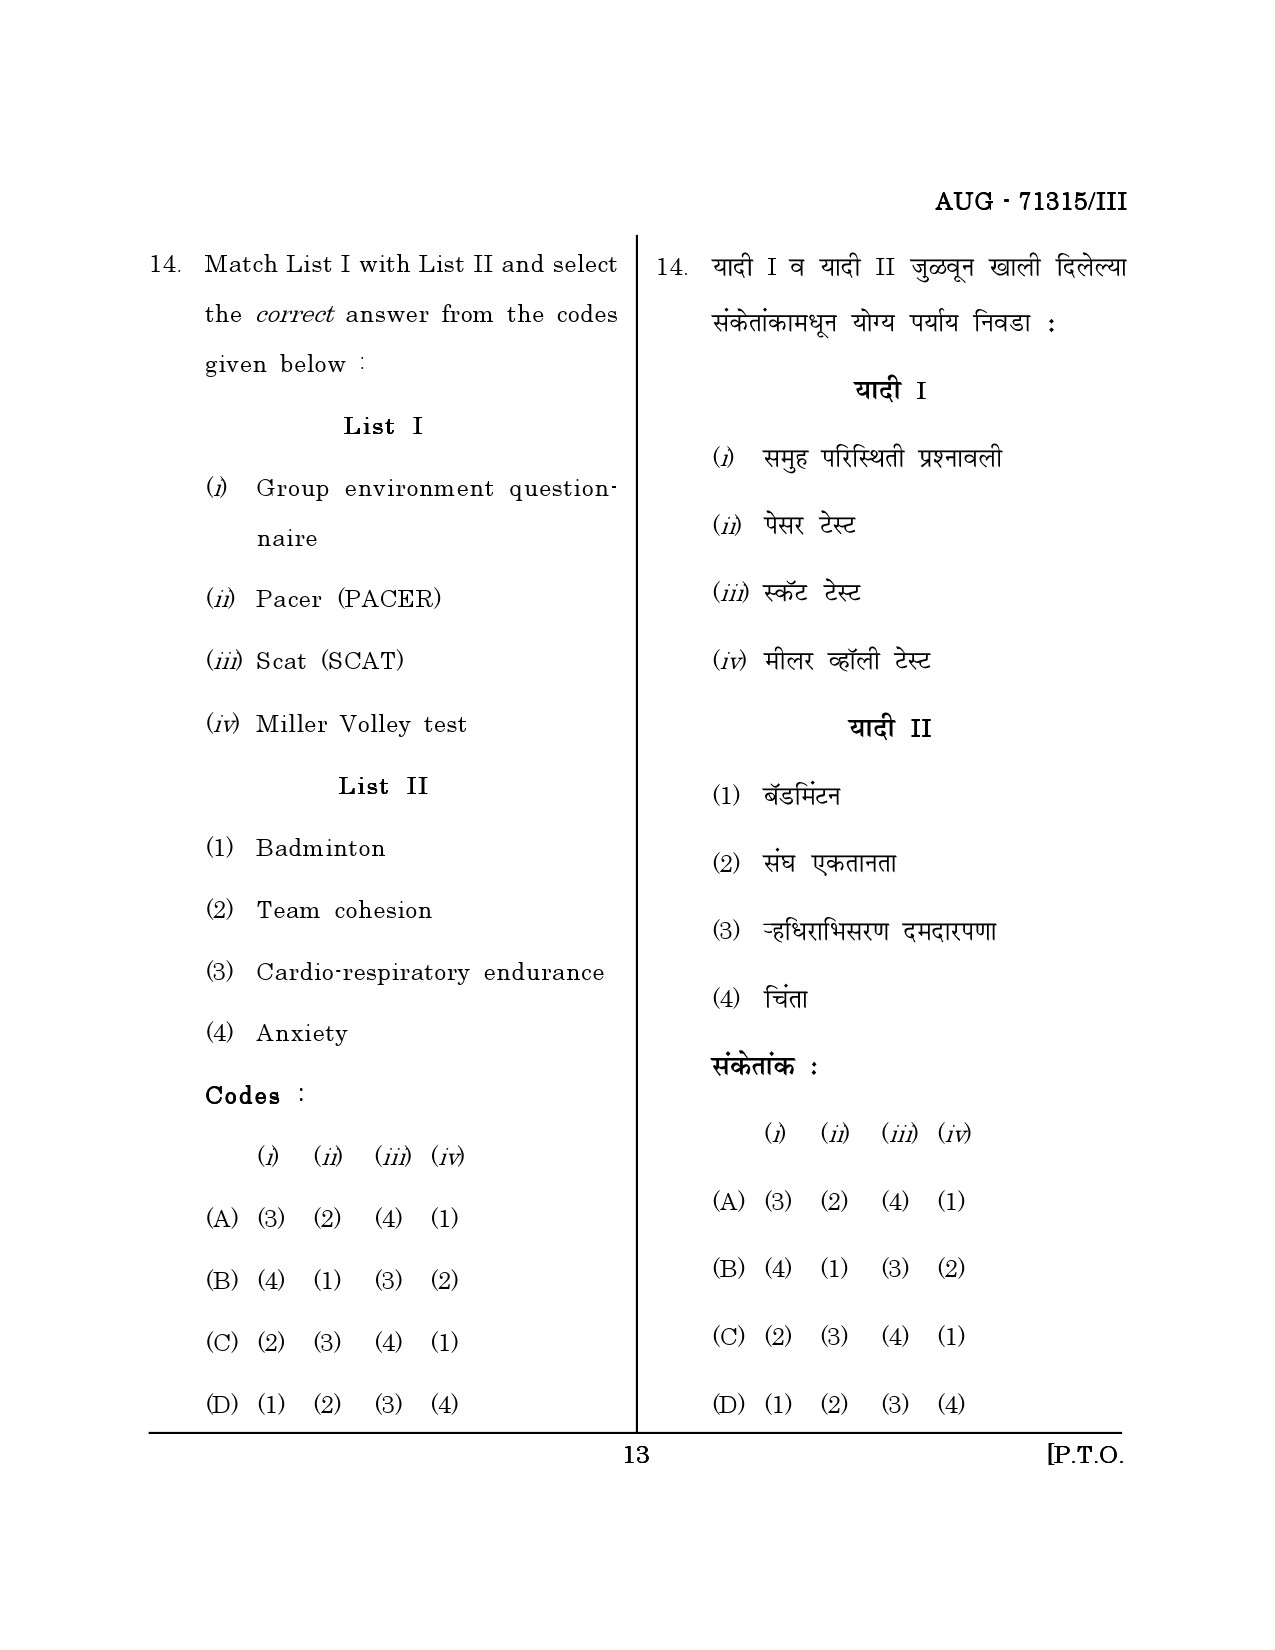 Maharashtra SET Physical Education Question Paper III August 2015 12